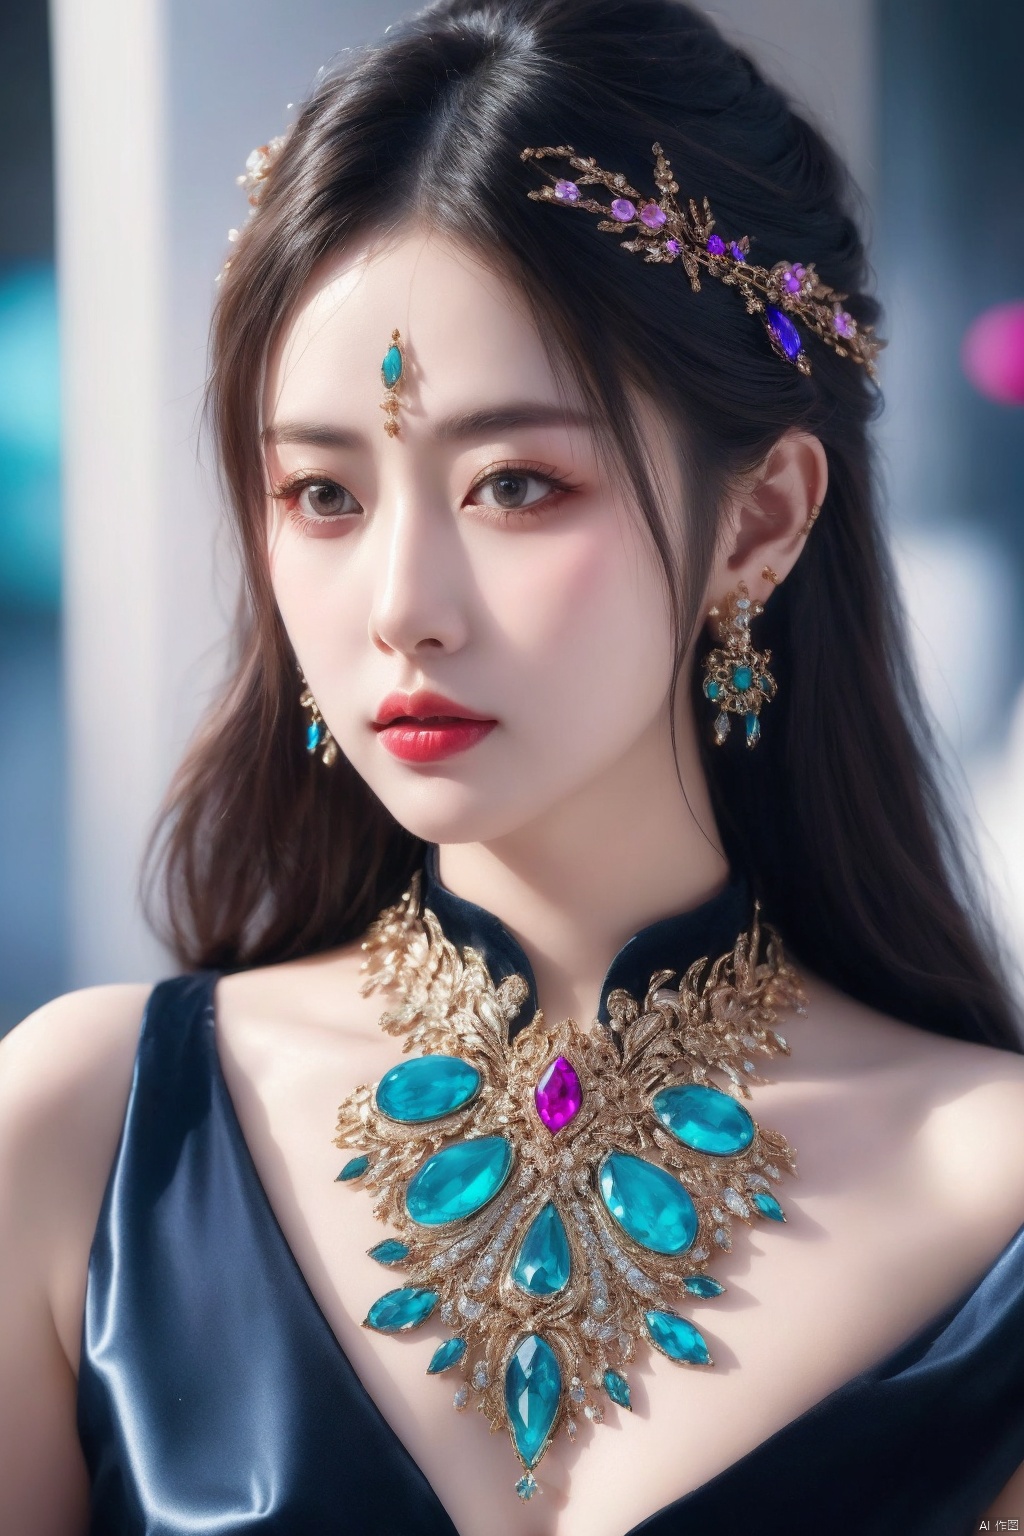  Hyperrealistic portrait of a beautiful woman wearing intricately detailed colorful clothing and futuristic jewellery,low-cut.